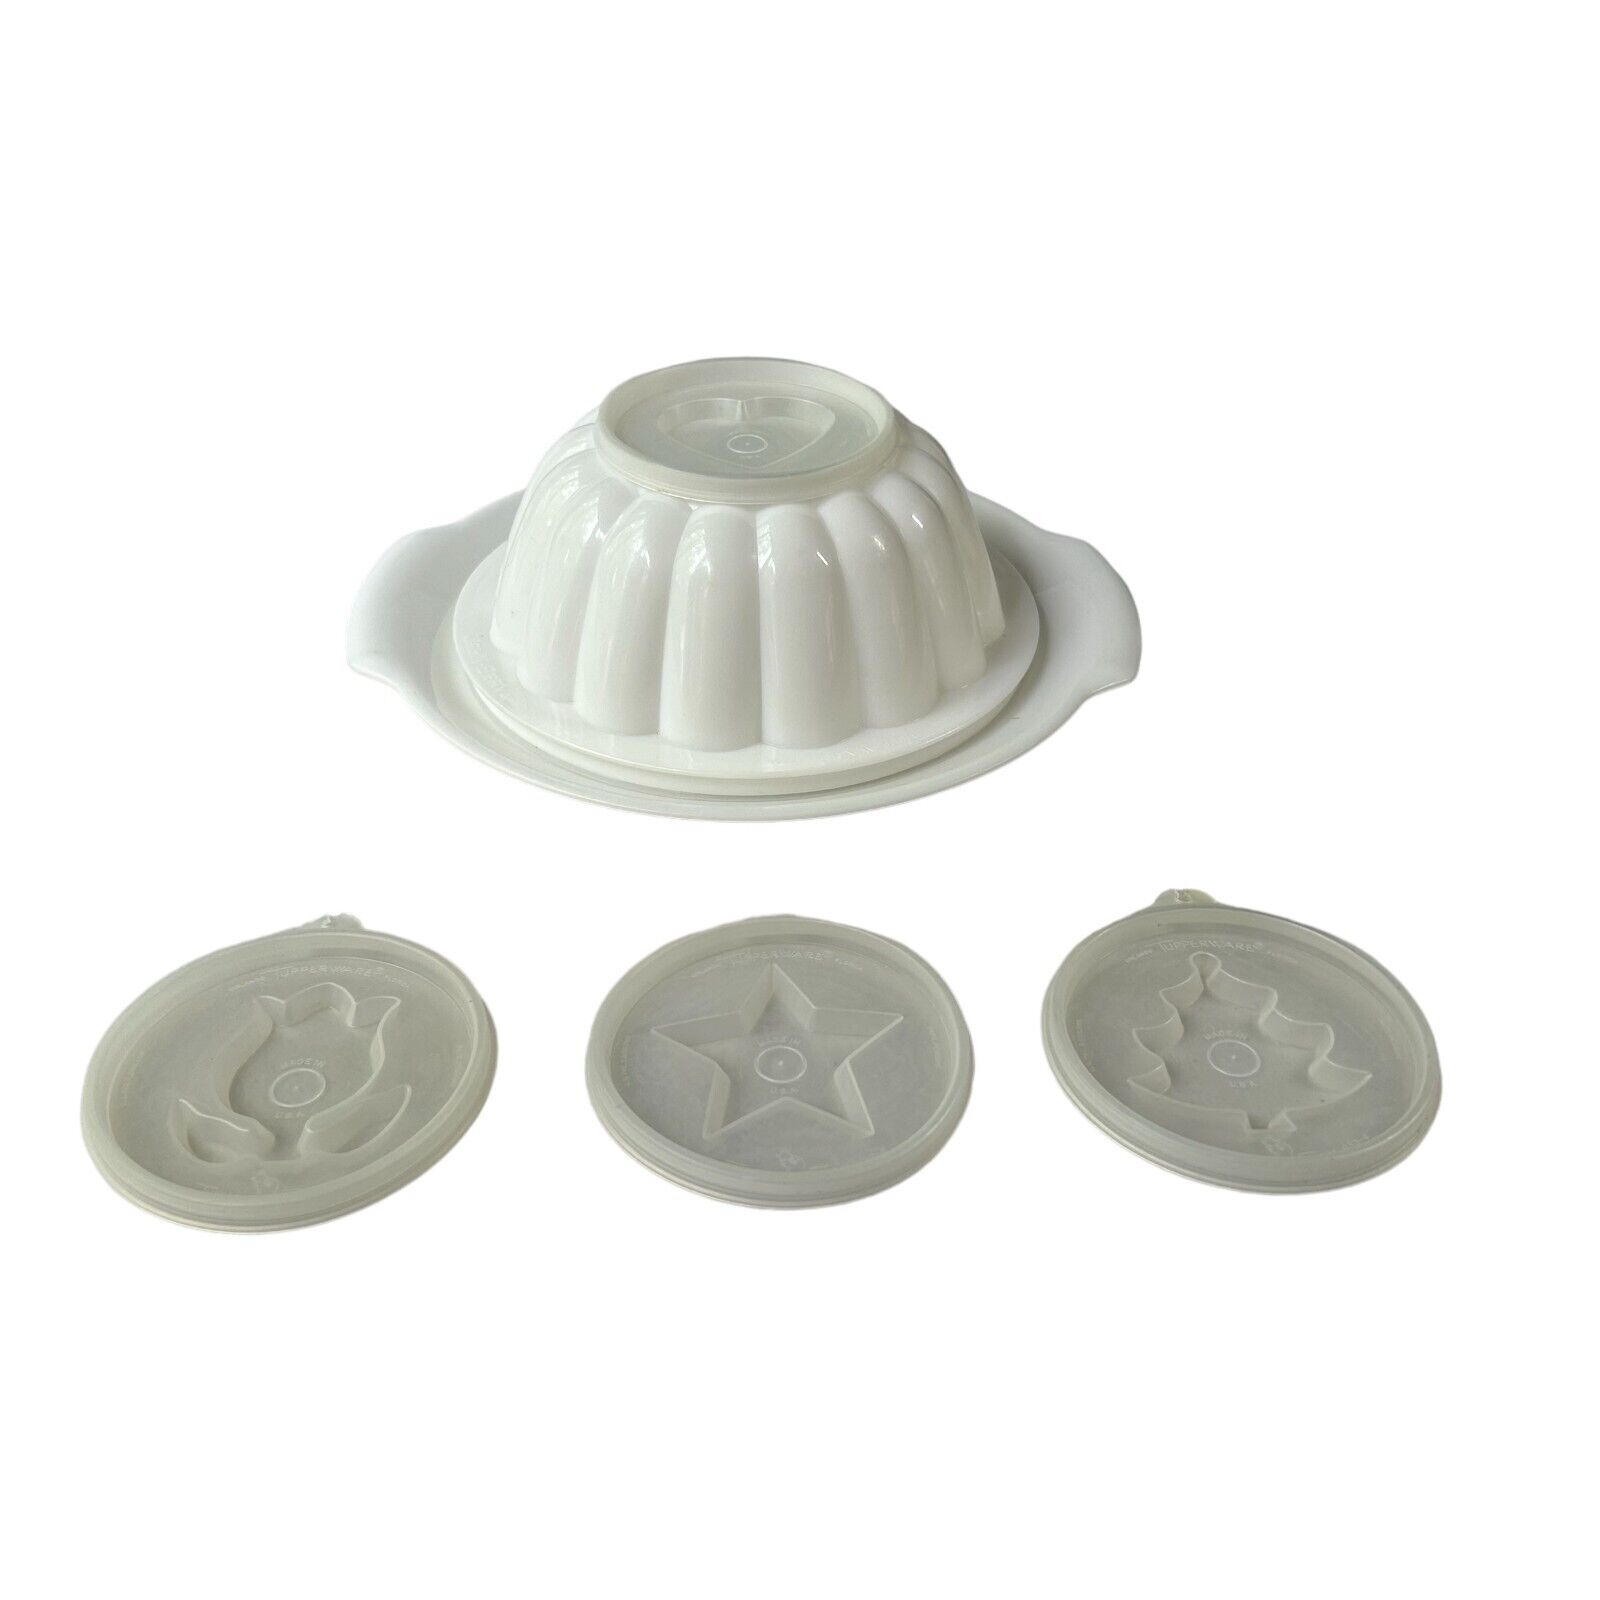 Vintage White Tuppeware Jello Mold with four shaped lids and serving tray